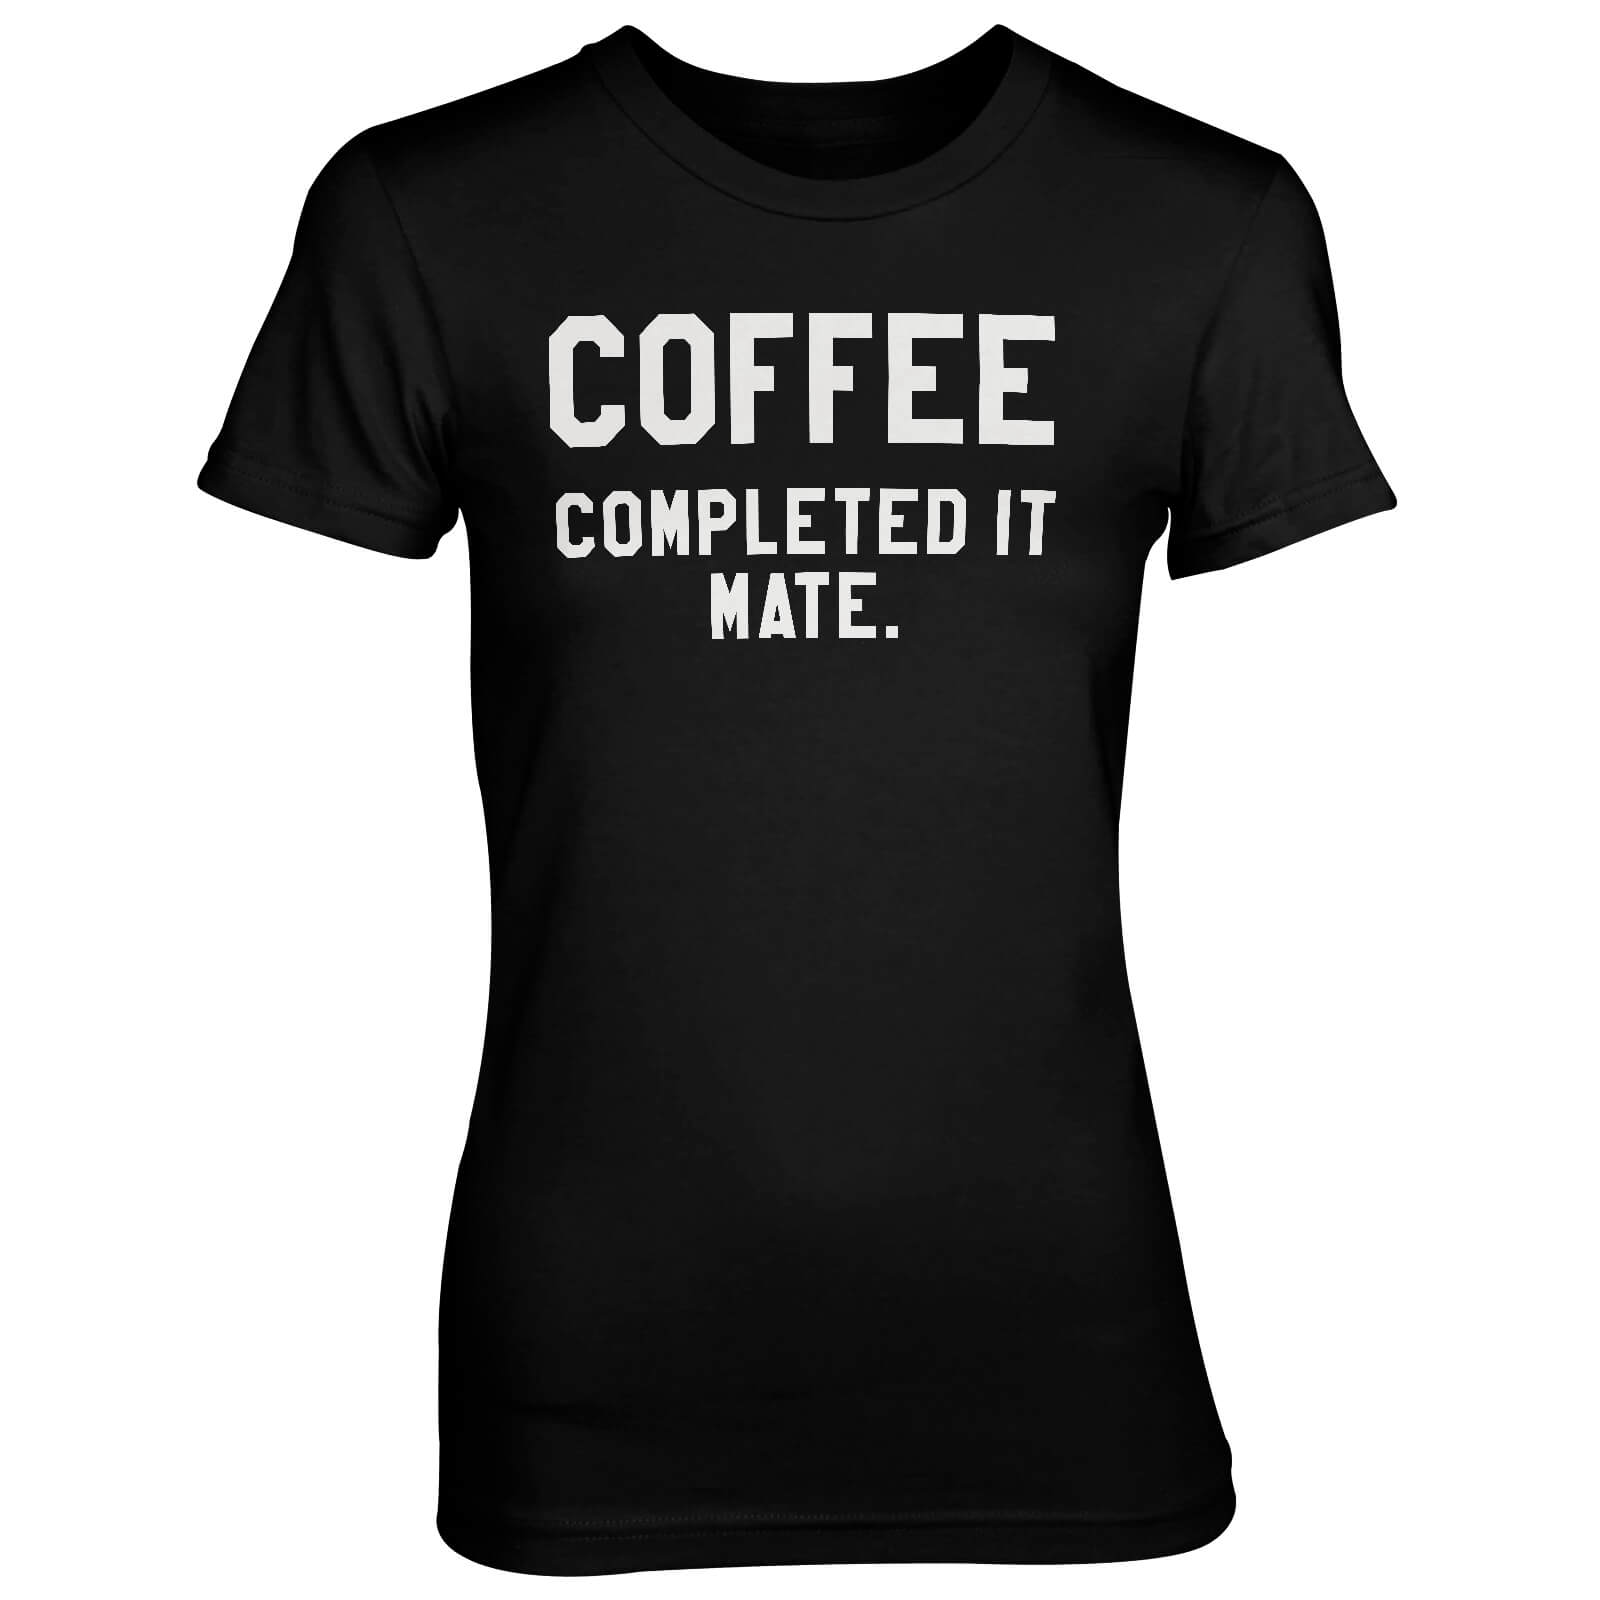 Coffee - Completed It Mate Women's Black T-Shirt - S - Black